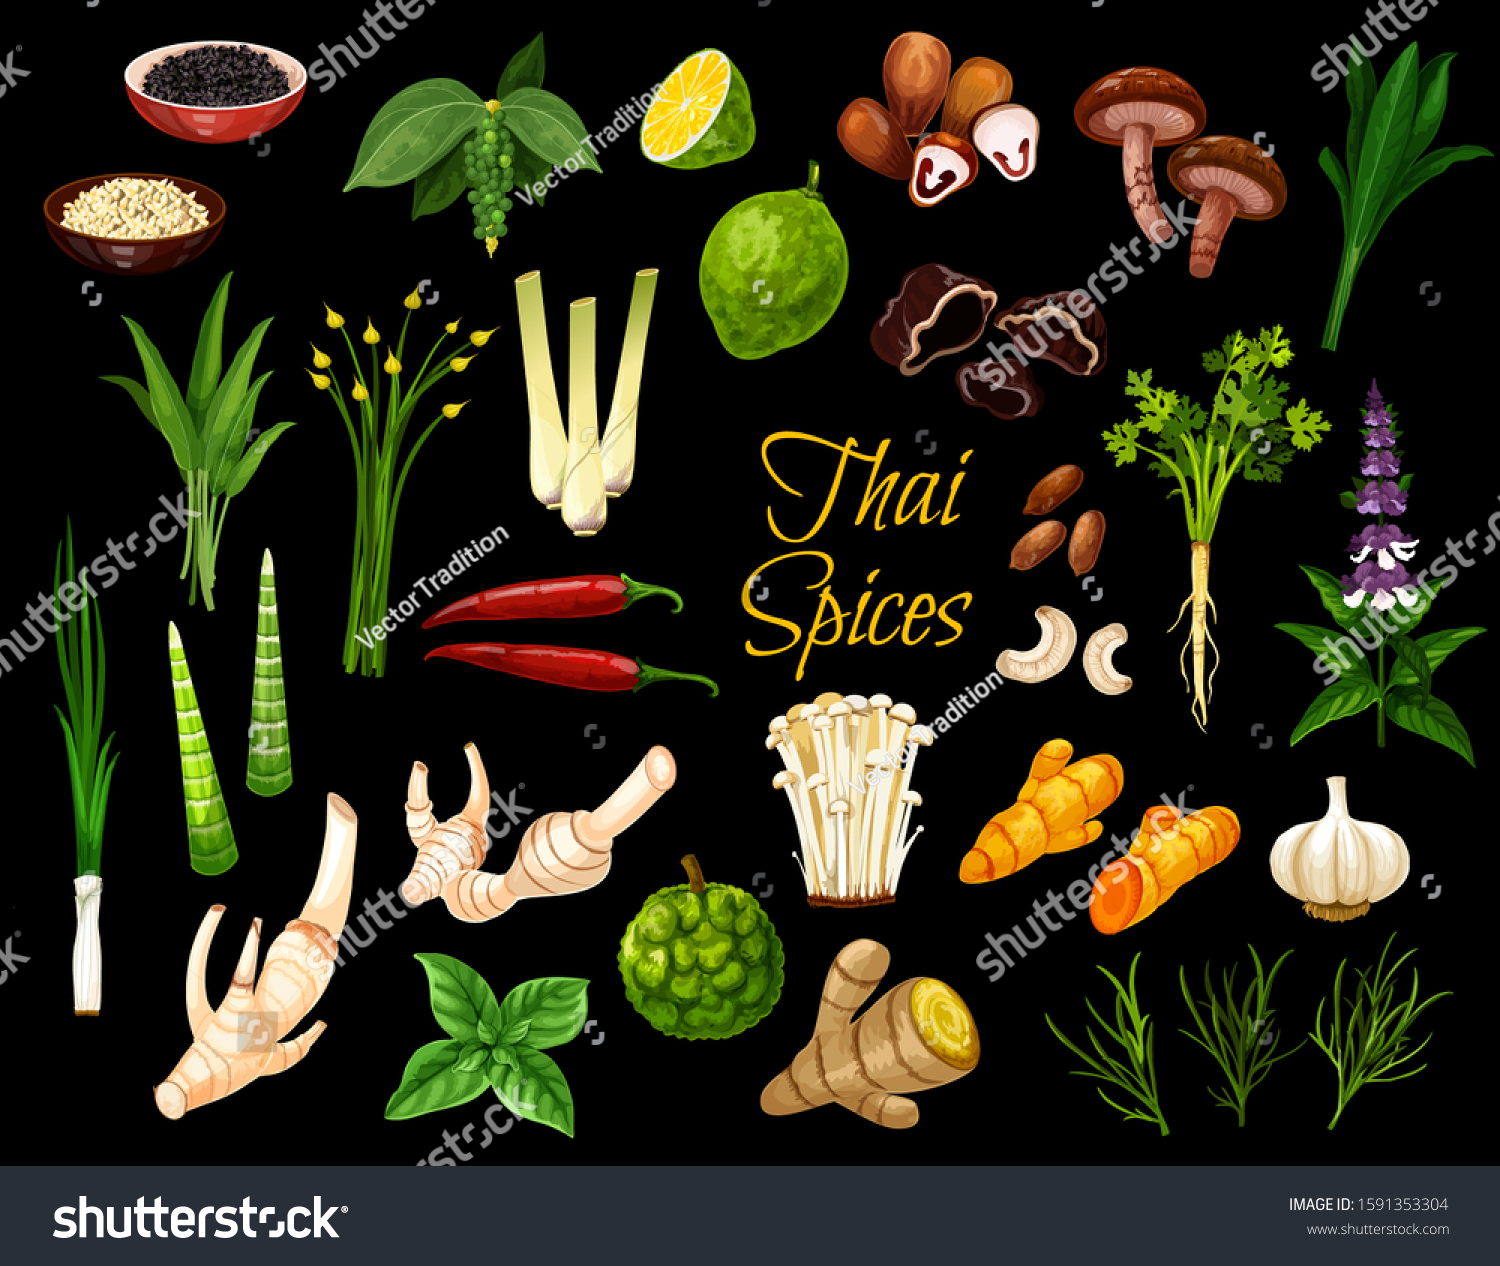 Cooking spices, Thai cuisine herbs and seasonings. Vector Thailand spices, condiments ans herbal flavorings, ginger root, lemongrass and kaffir lime, coriander, lotus and shiitake mushrooms #1591353304